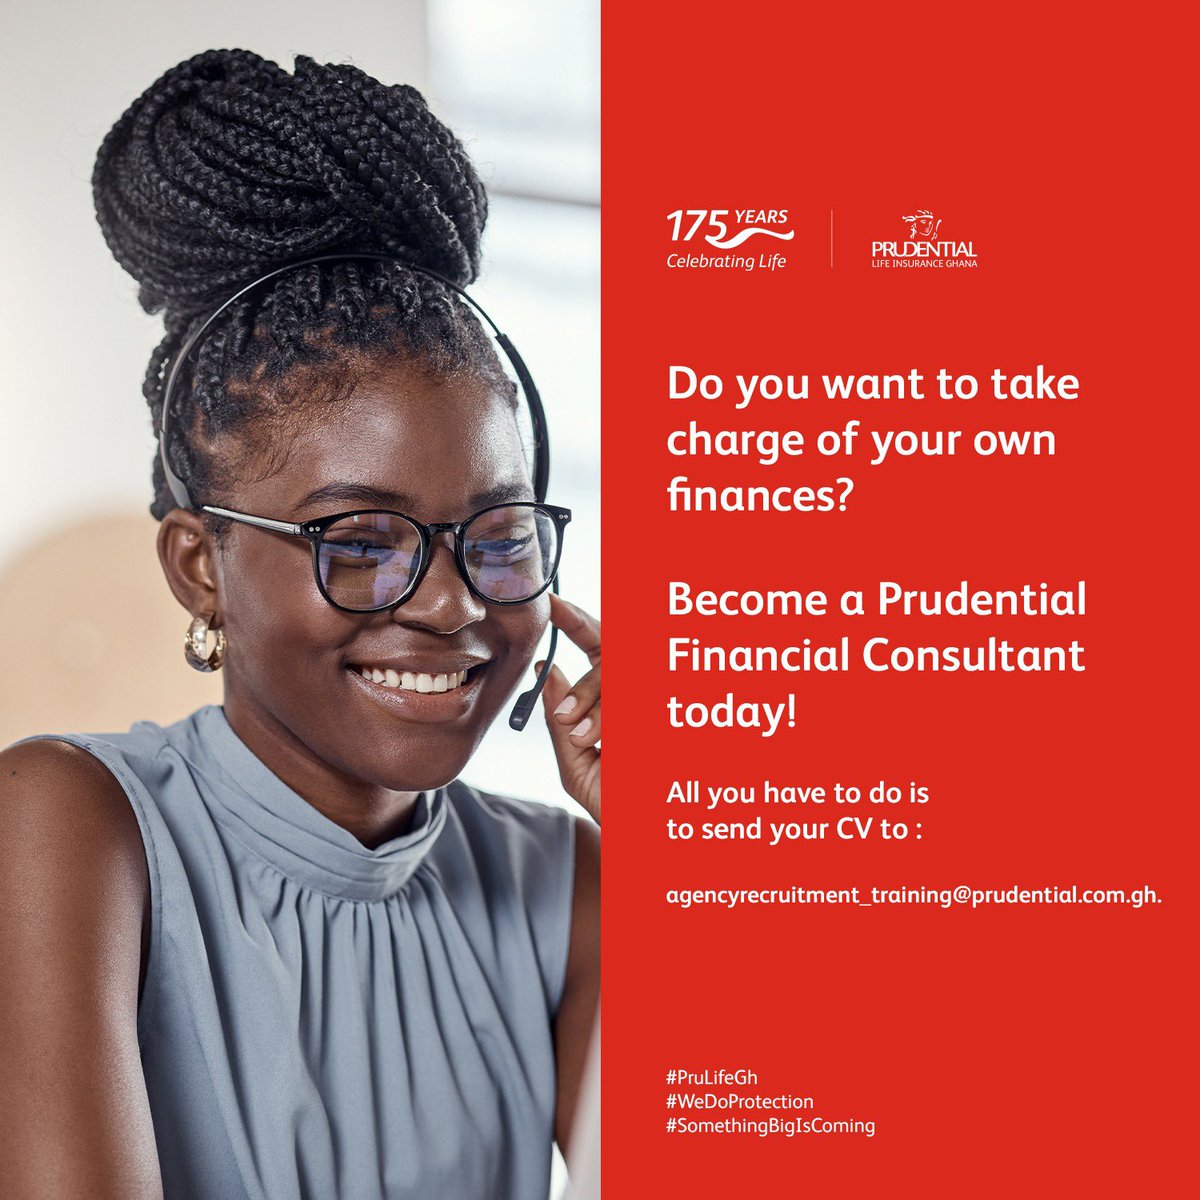 With your drive and determination to excel, you can shape your own success story today. 

Send your CV to agencyrecruitment_training@prudential.com.gh. 

#PruLifeGH
#WeDoProtection 
#SomethingBigIsComing
#featurebyprudentiallife